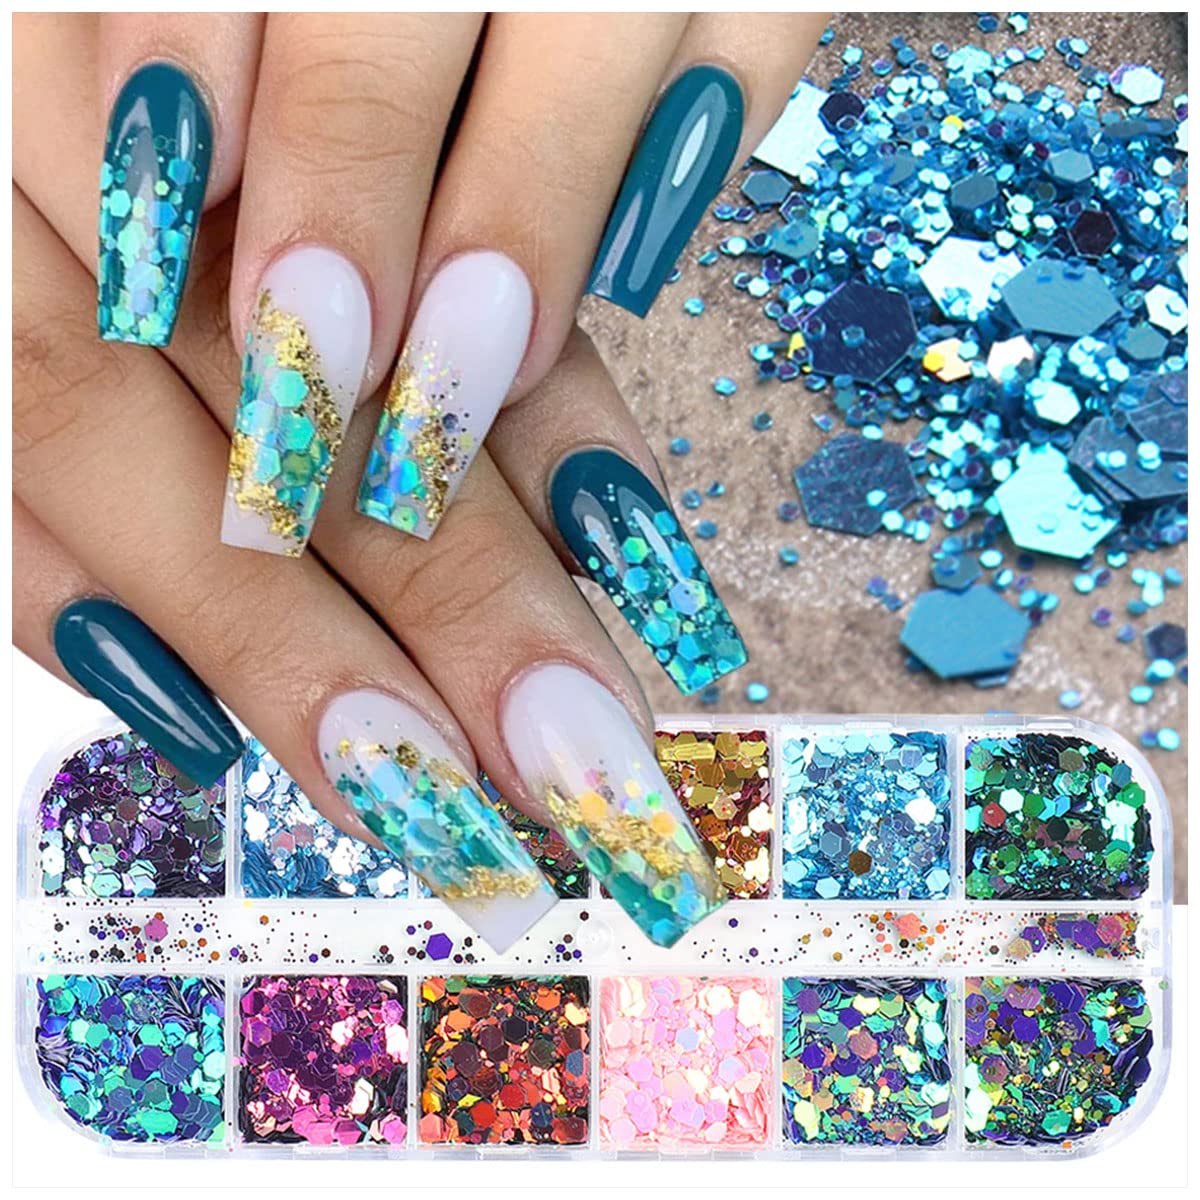 AddFavor 9 Colors Iridescent Nail Glitter Flakes Mermaid Chunky Glitter  Shiny Hexagon Sparkles Accessories for Nail Art